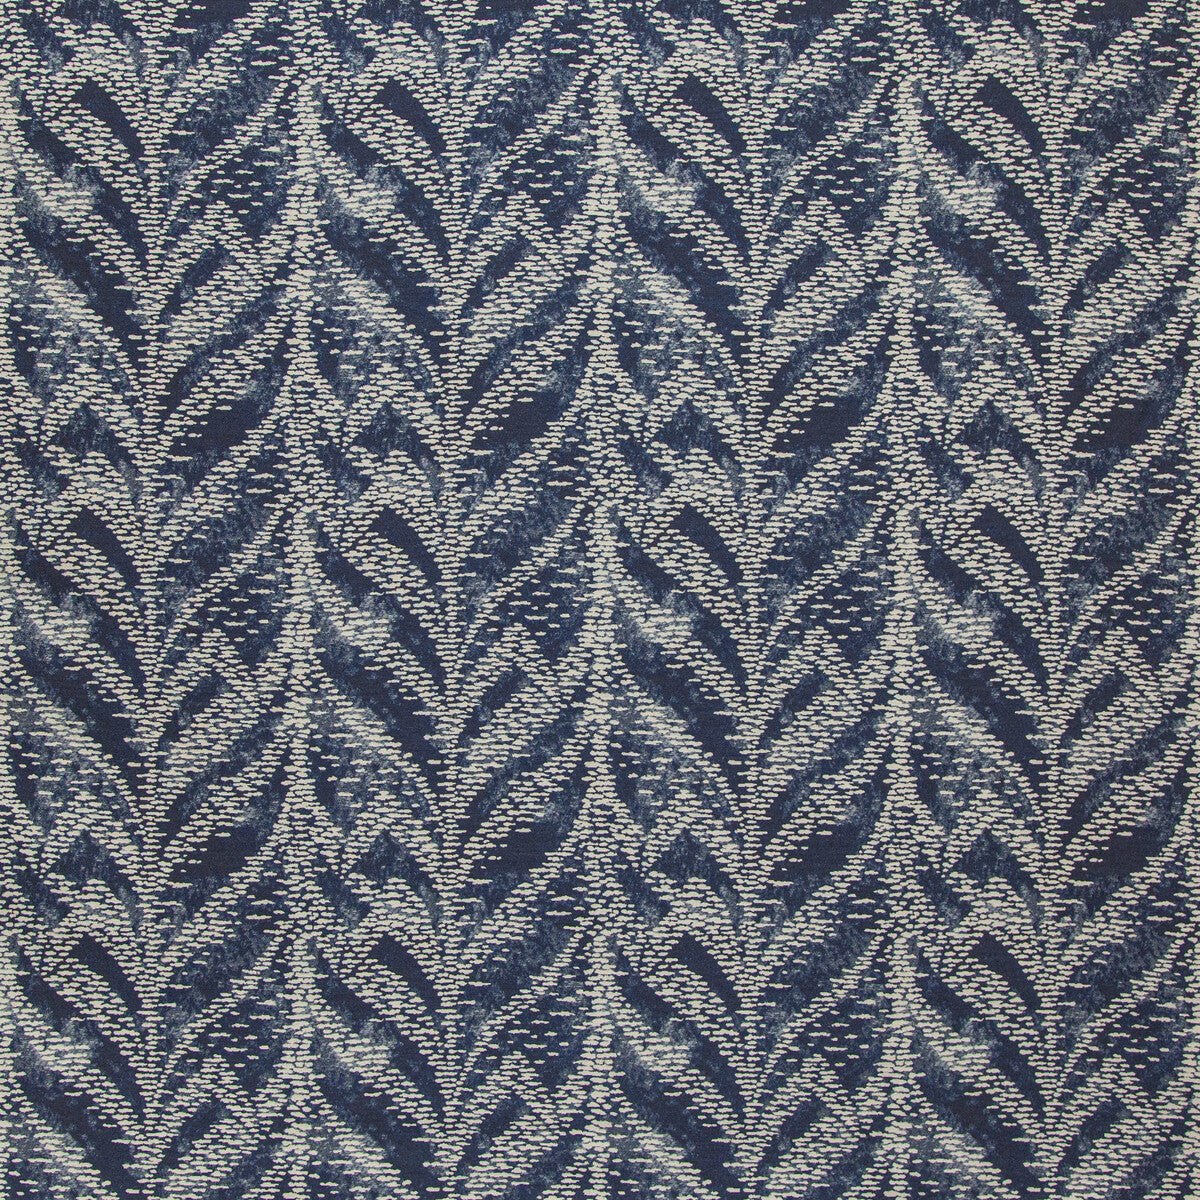 Pompano fabric in navy color - pattern 35818.50.0 - by Kravet Design in the Indoor / Outdoor collection